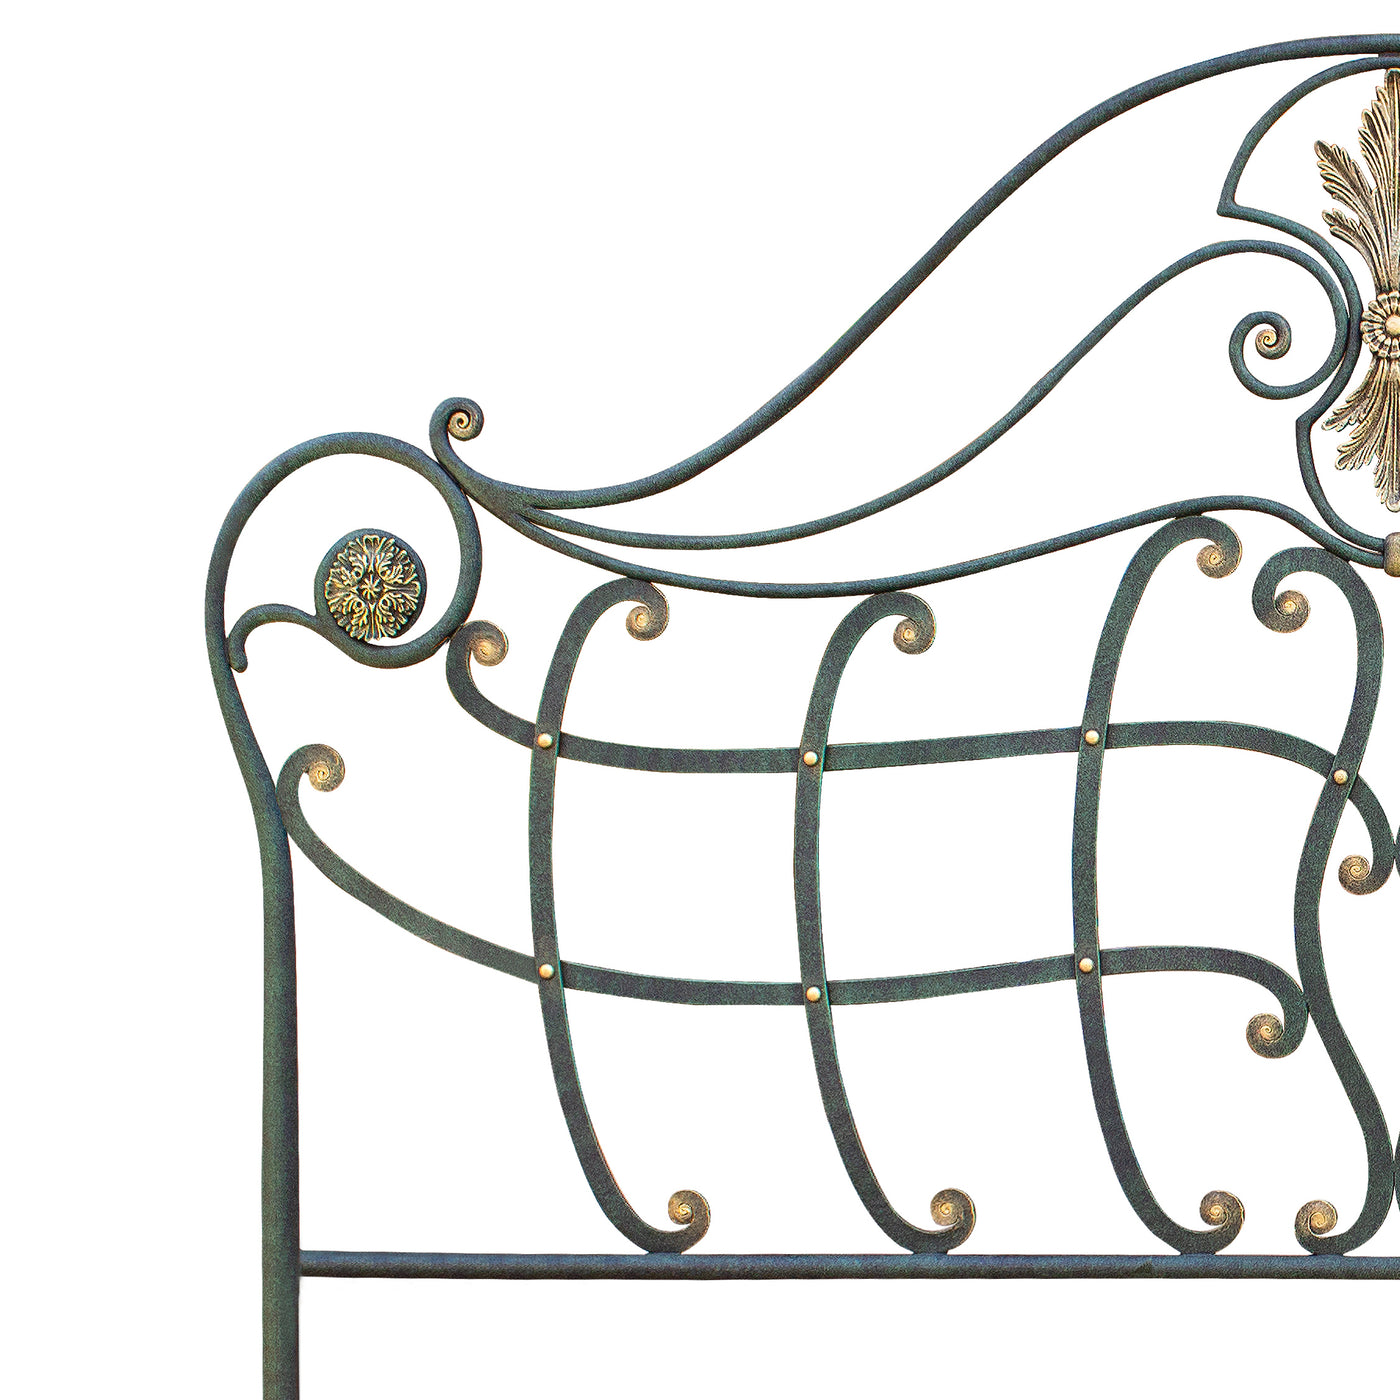 Close up of a classical metal headboard with handmade scrolls painted in an antique green and golden finish